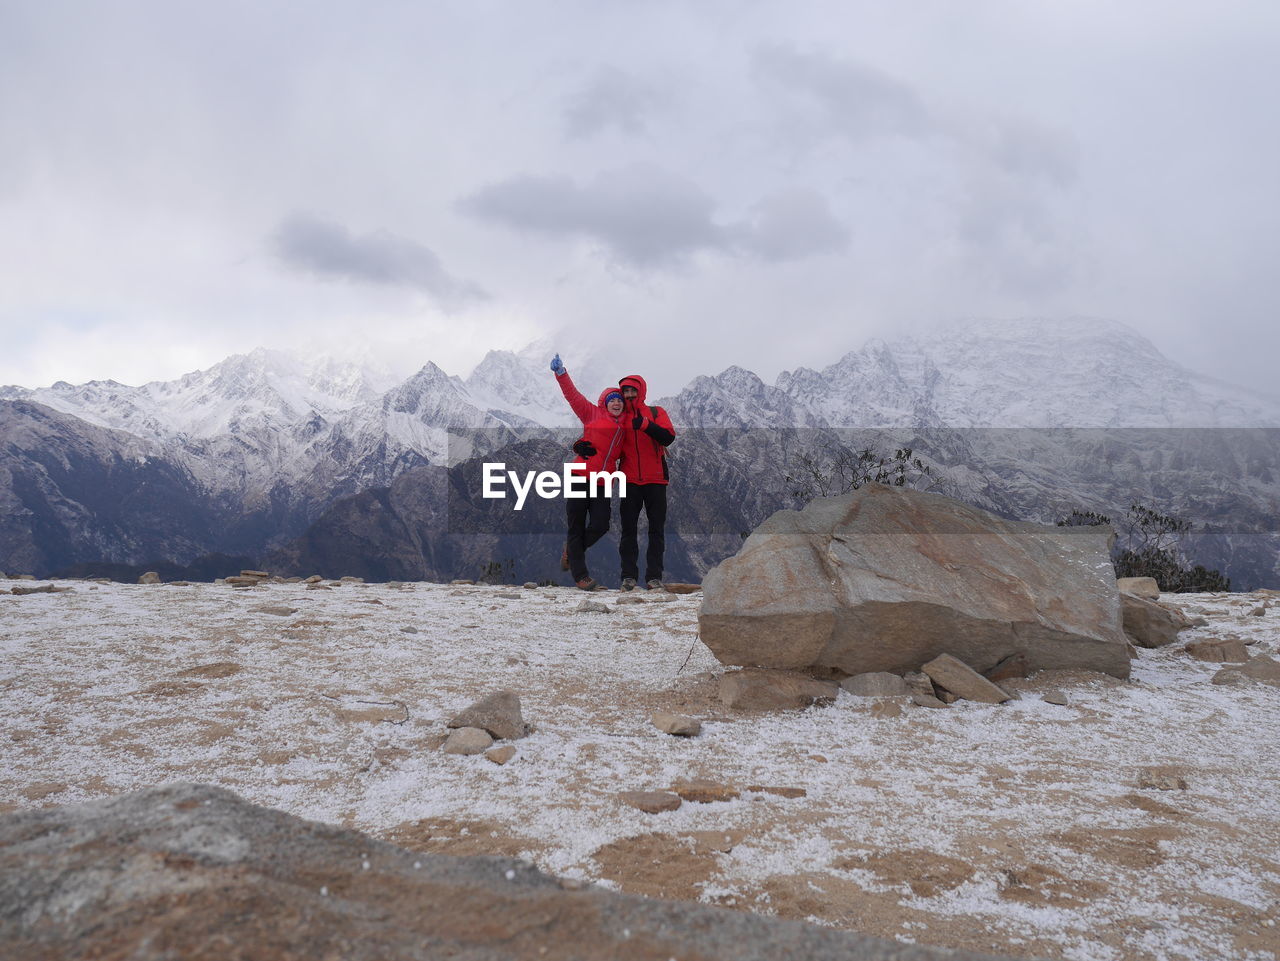 Couple with hand raised standing against snowcapped mountains